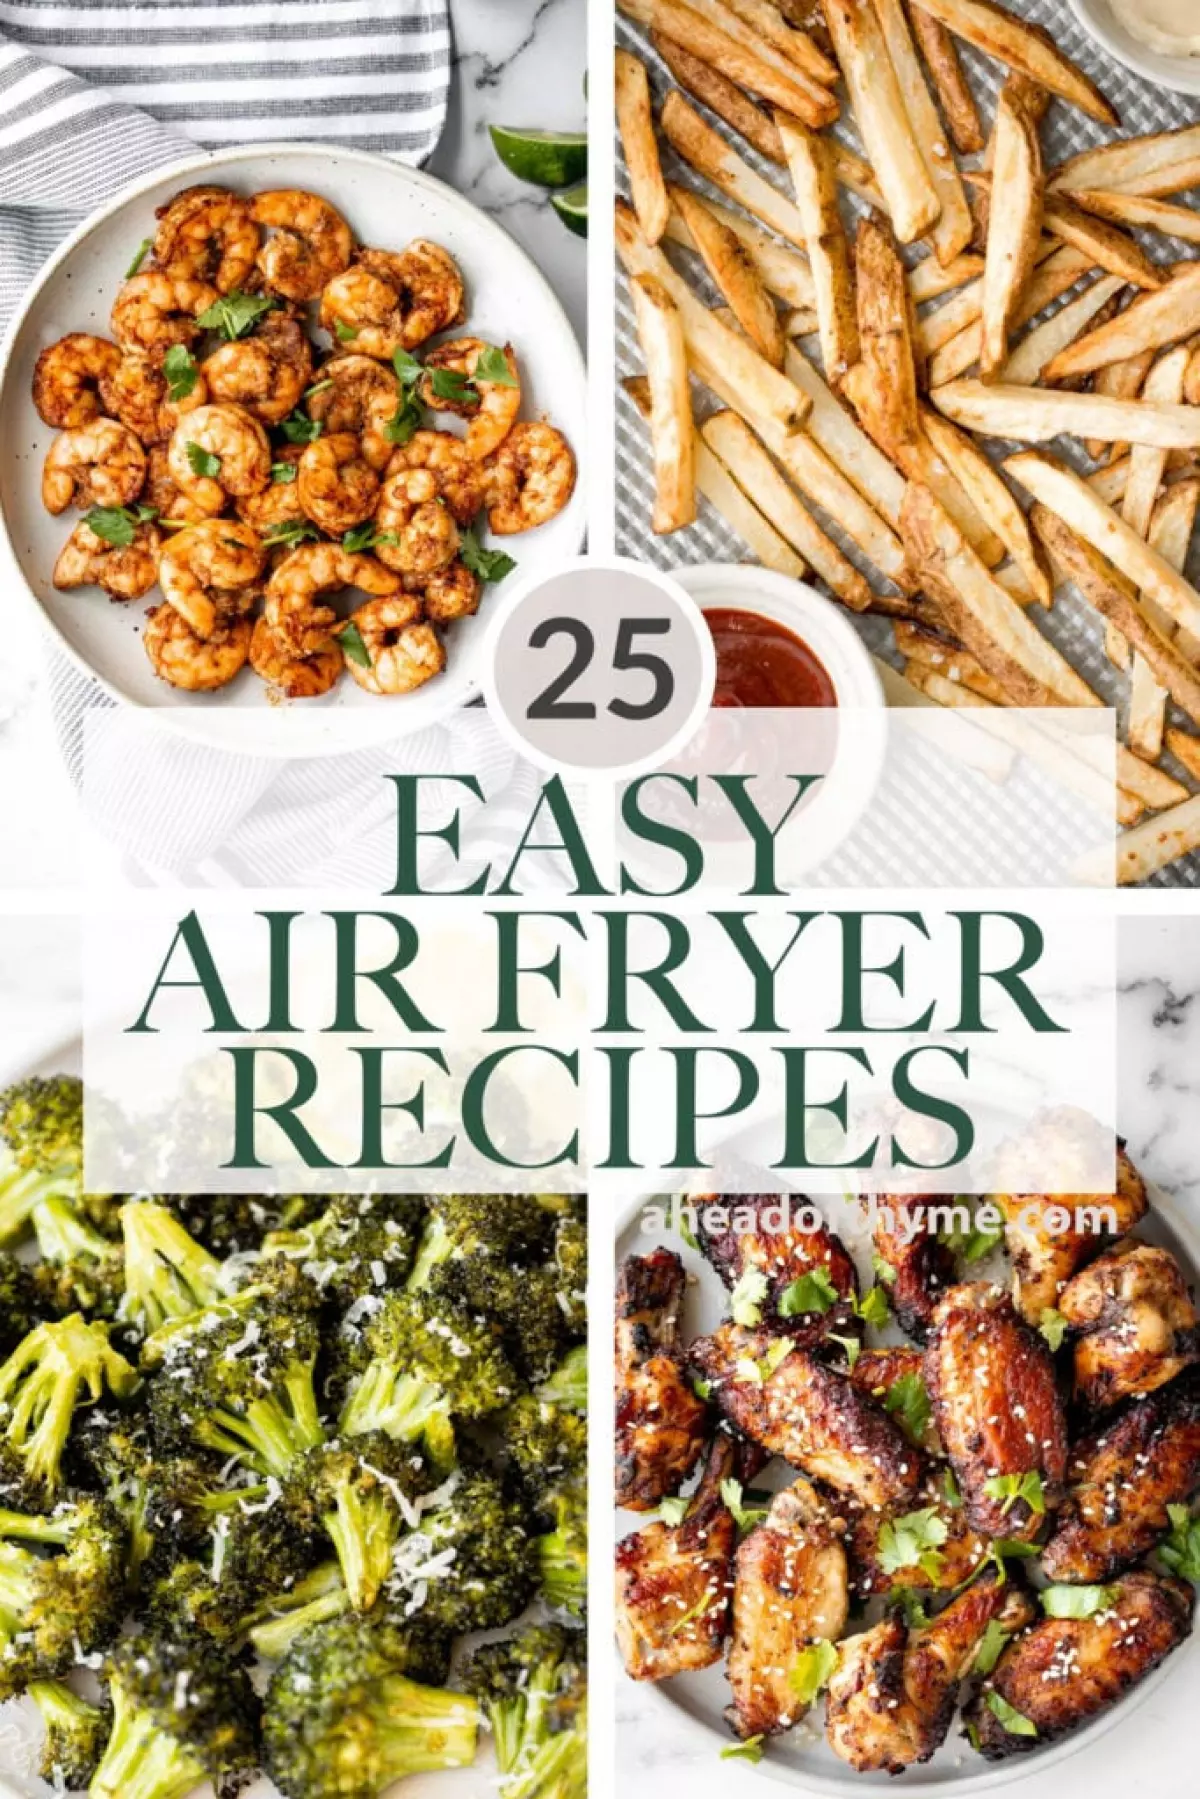 A collection of over 25 best quick and easy air fryer recipes including vegetables, chicken, beef, lamb, salmon, shrimp, and more. Perfect for busy people.